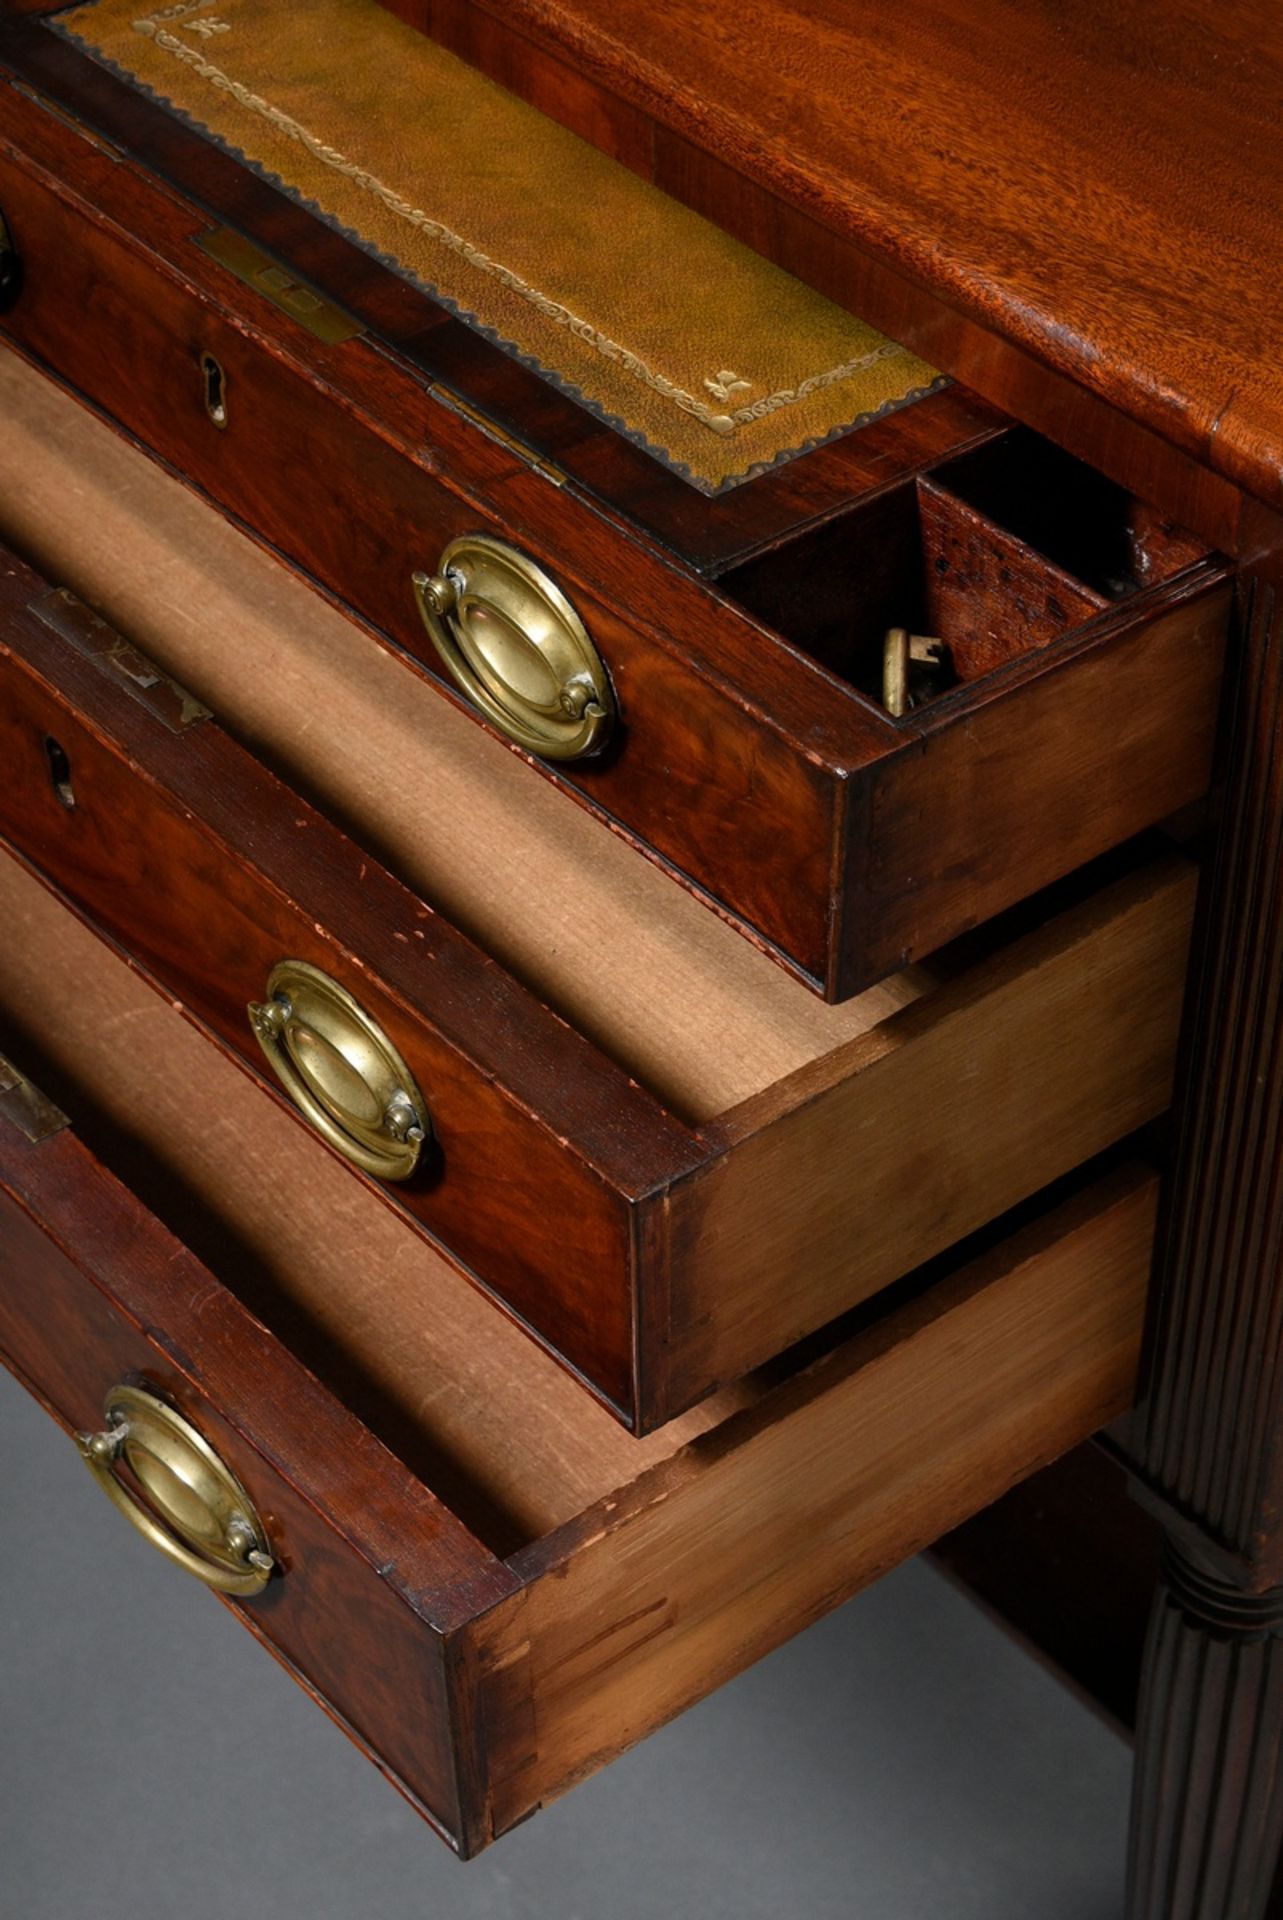 Three-bay occasional furniture on fluted legs with pull-out writing drawer and punched leather top, - Image 3 of 6